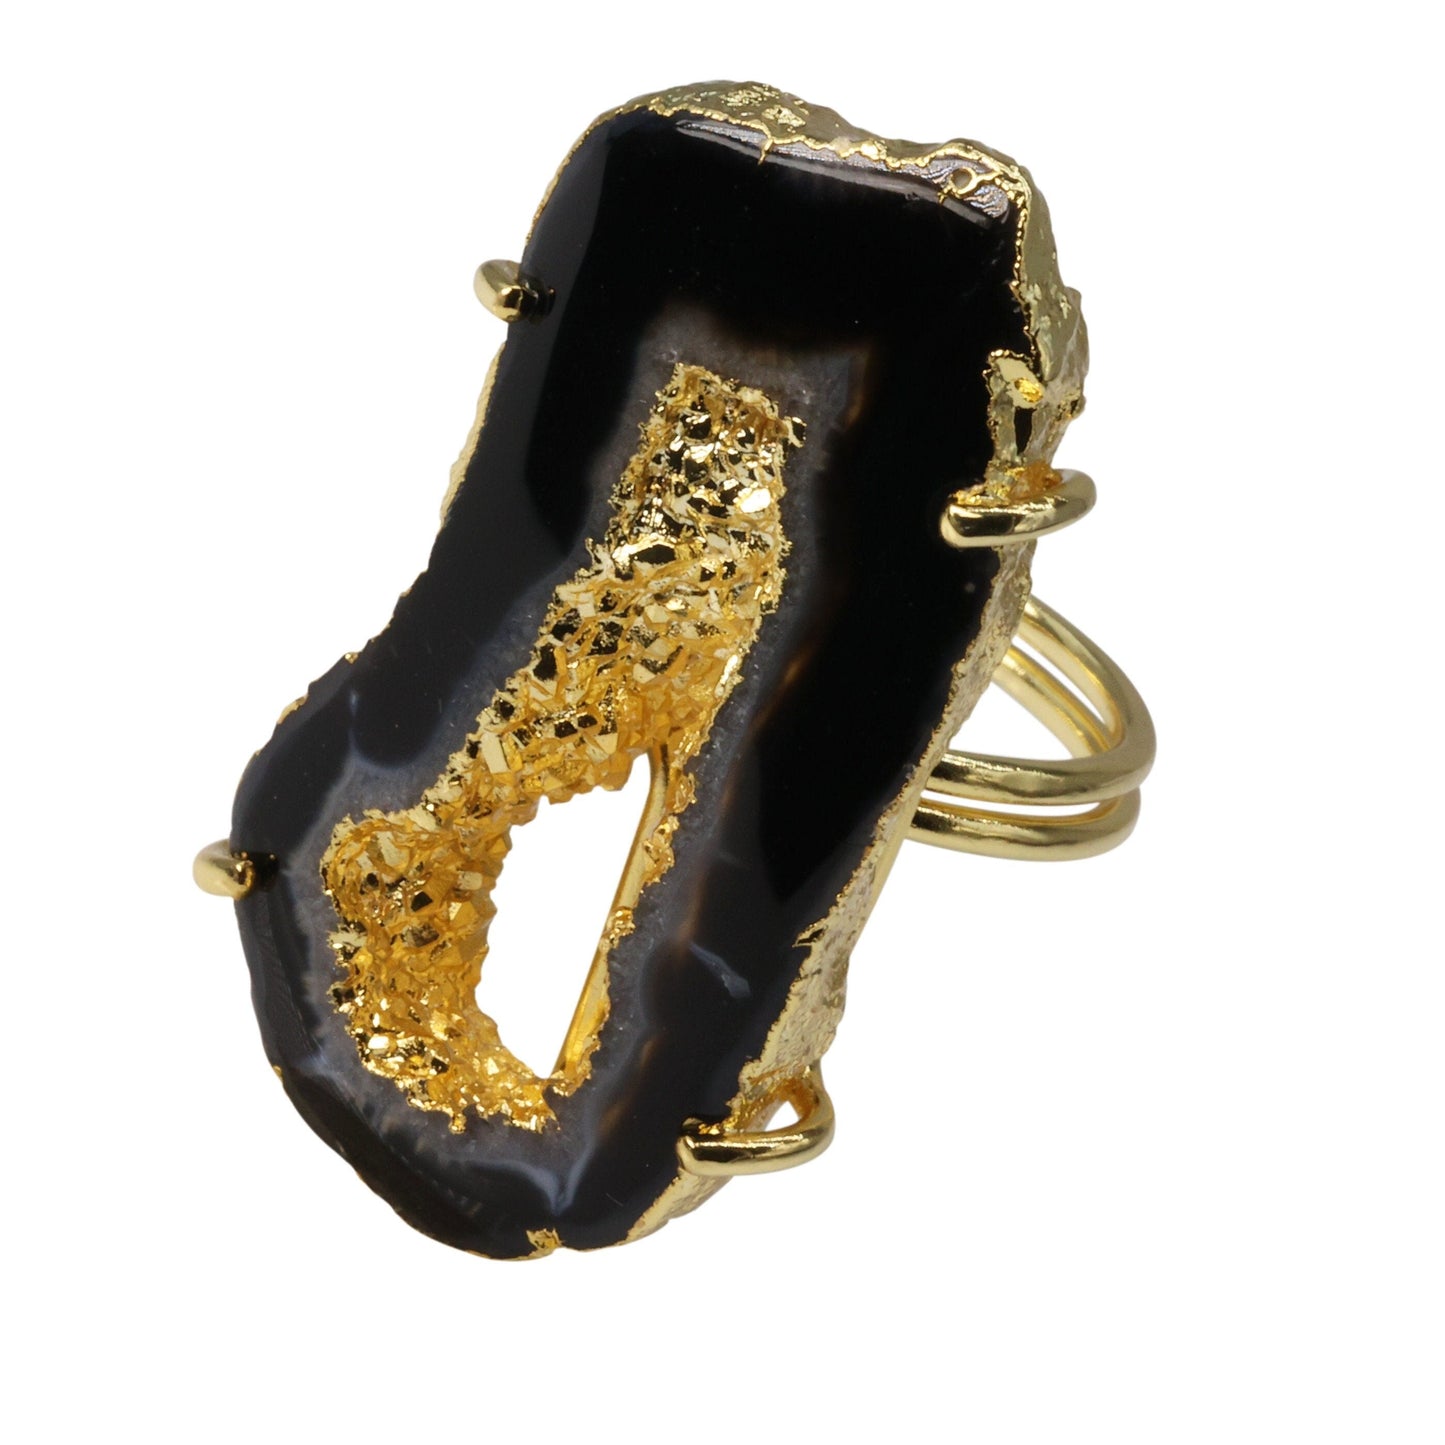 Elegant Handcrafted Agate Geode Slice Ring: Adjustable Brass Band with Prong Setting in Silver, Gold, or Rose Gold - Meena Design